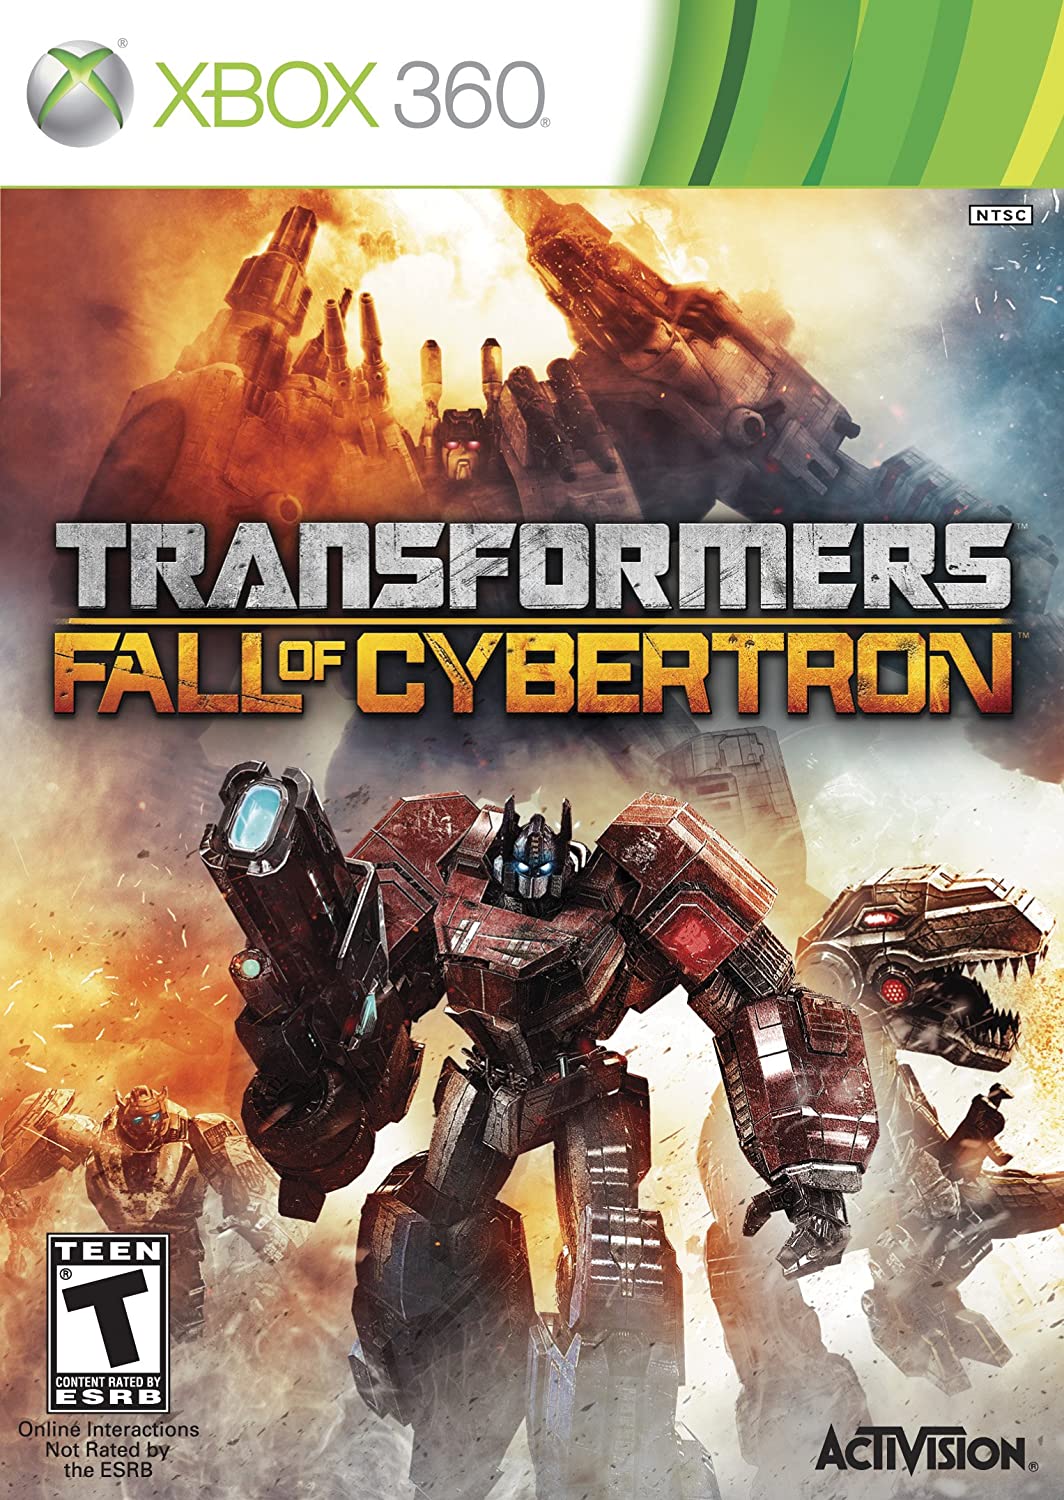 Transformers: Fall of Cybertron player count stats